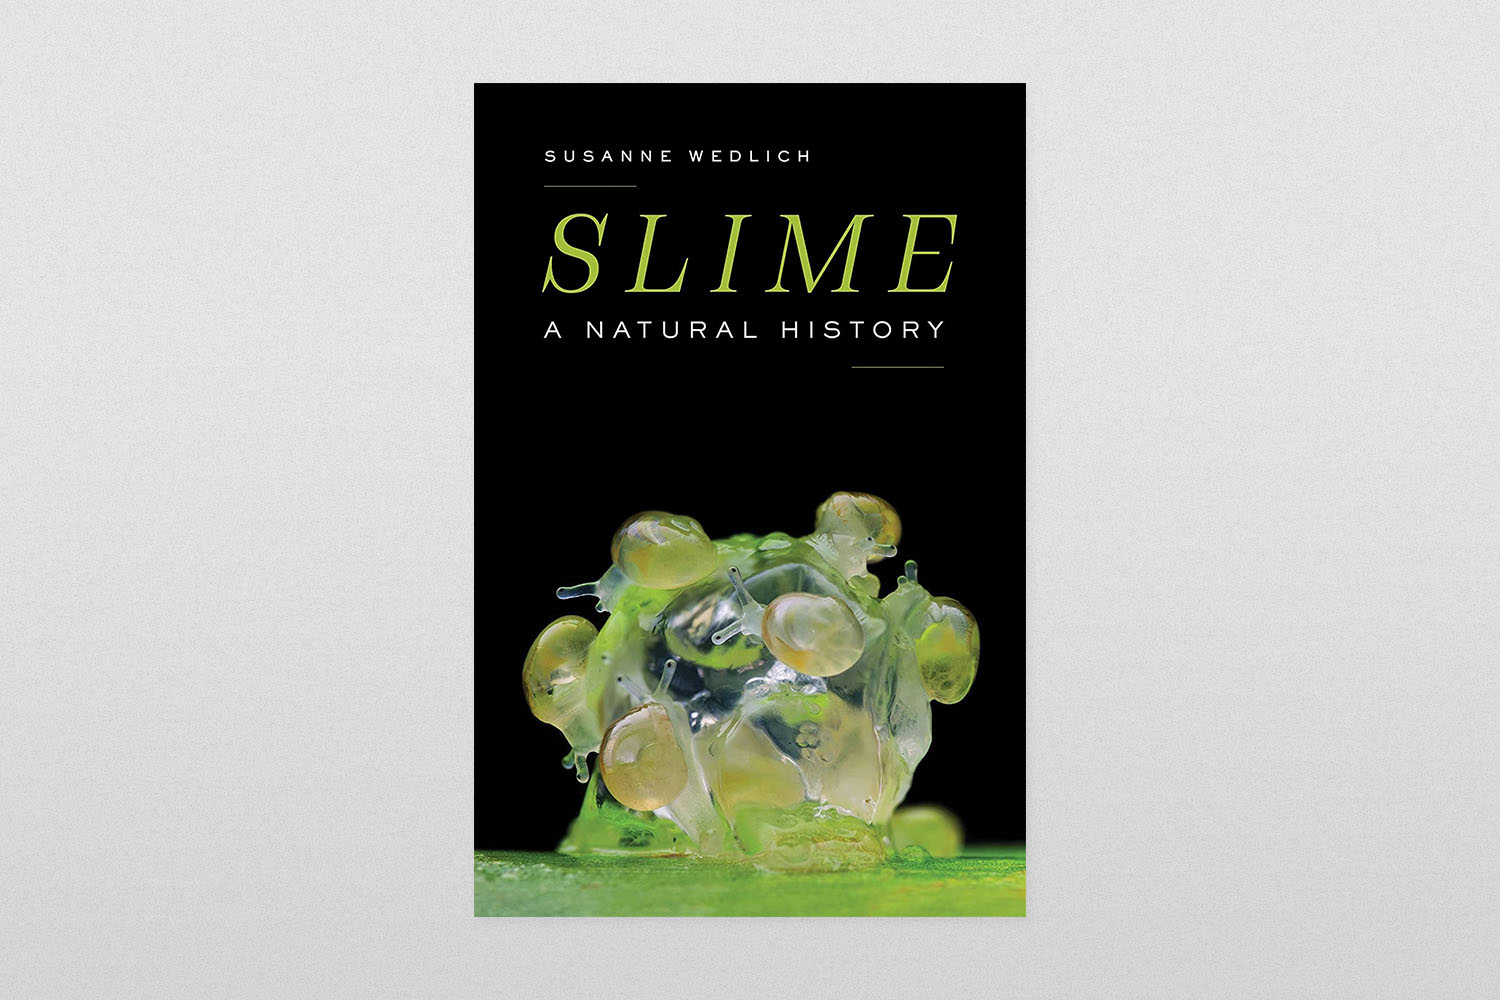 Slime- A Natural History by Susanne Wedlich